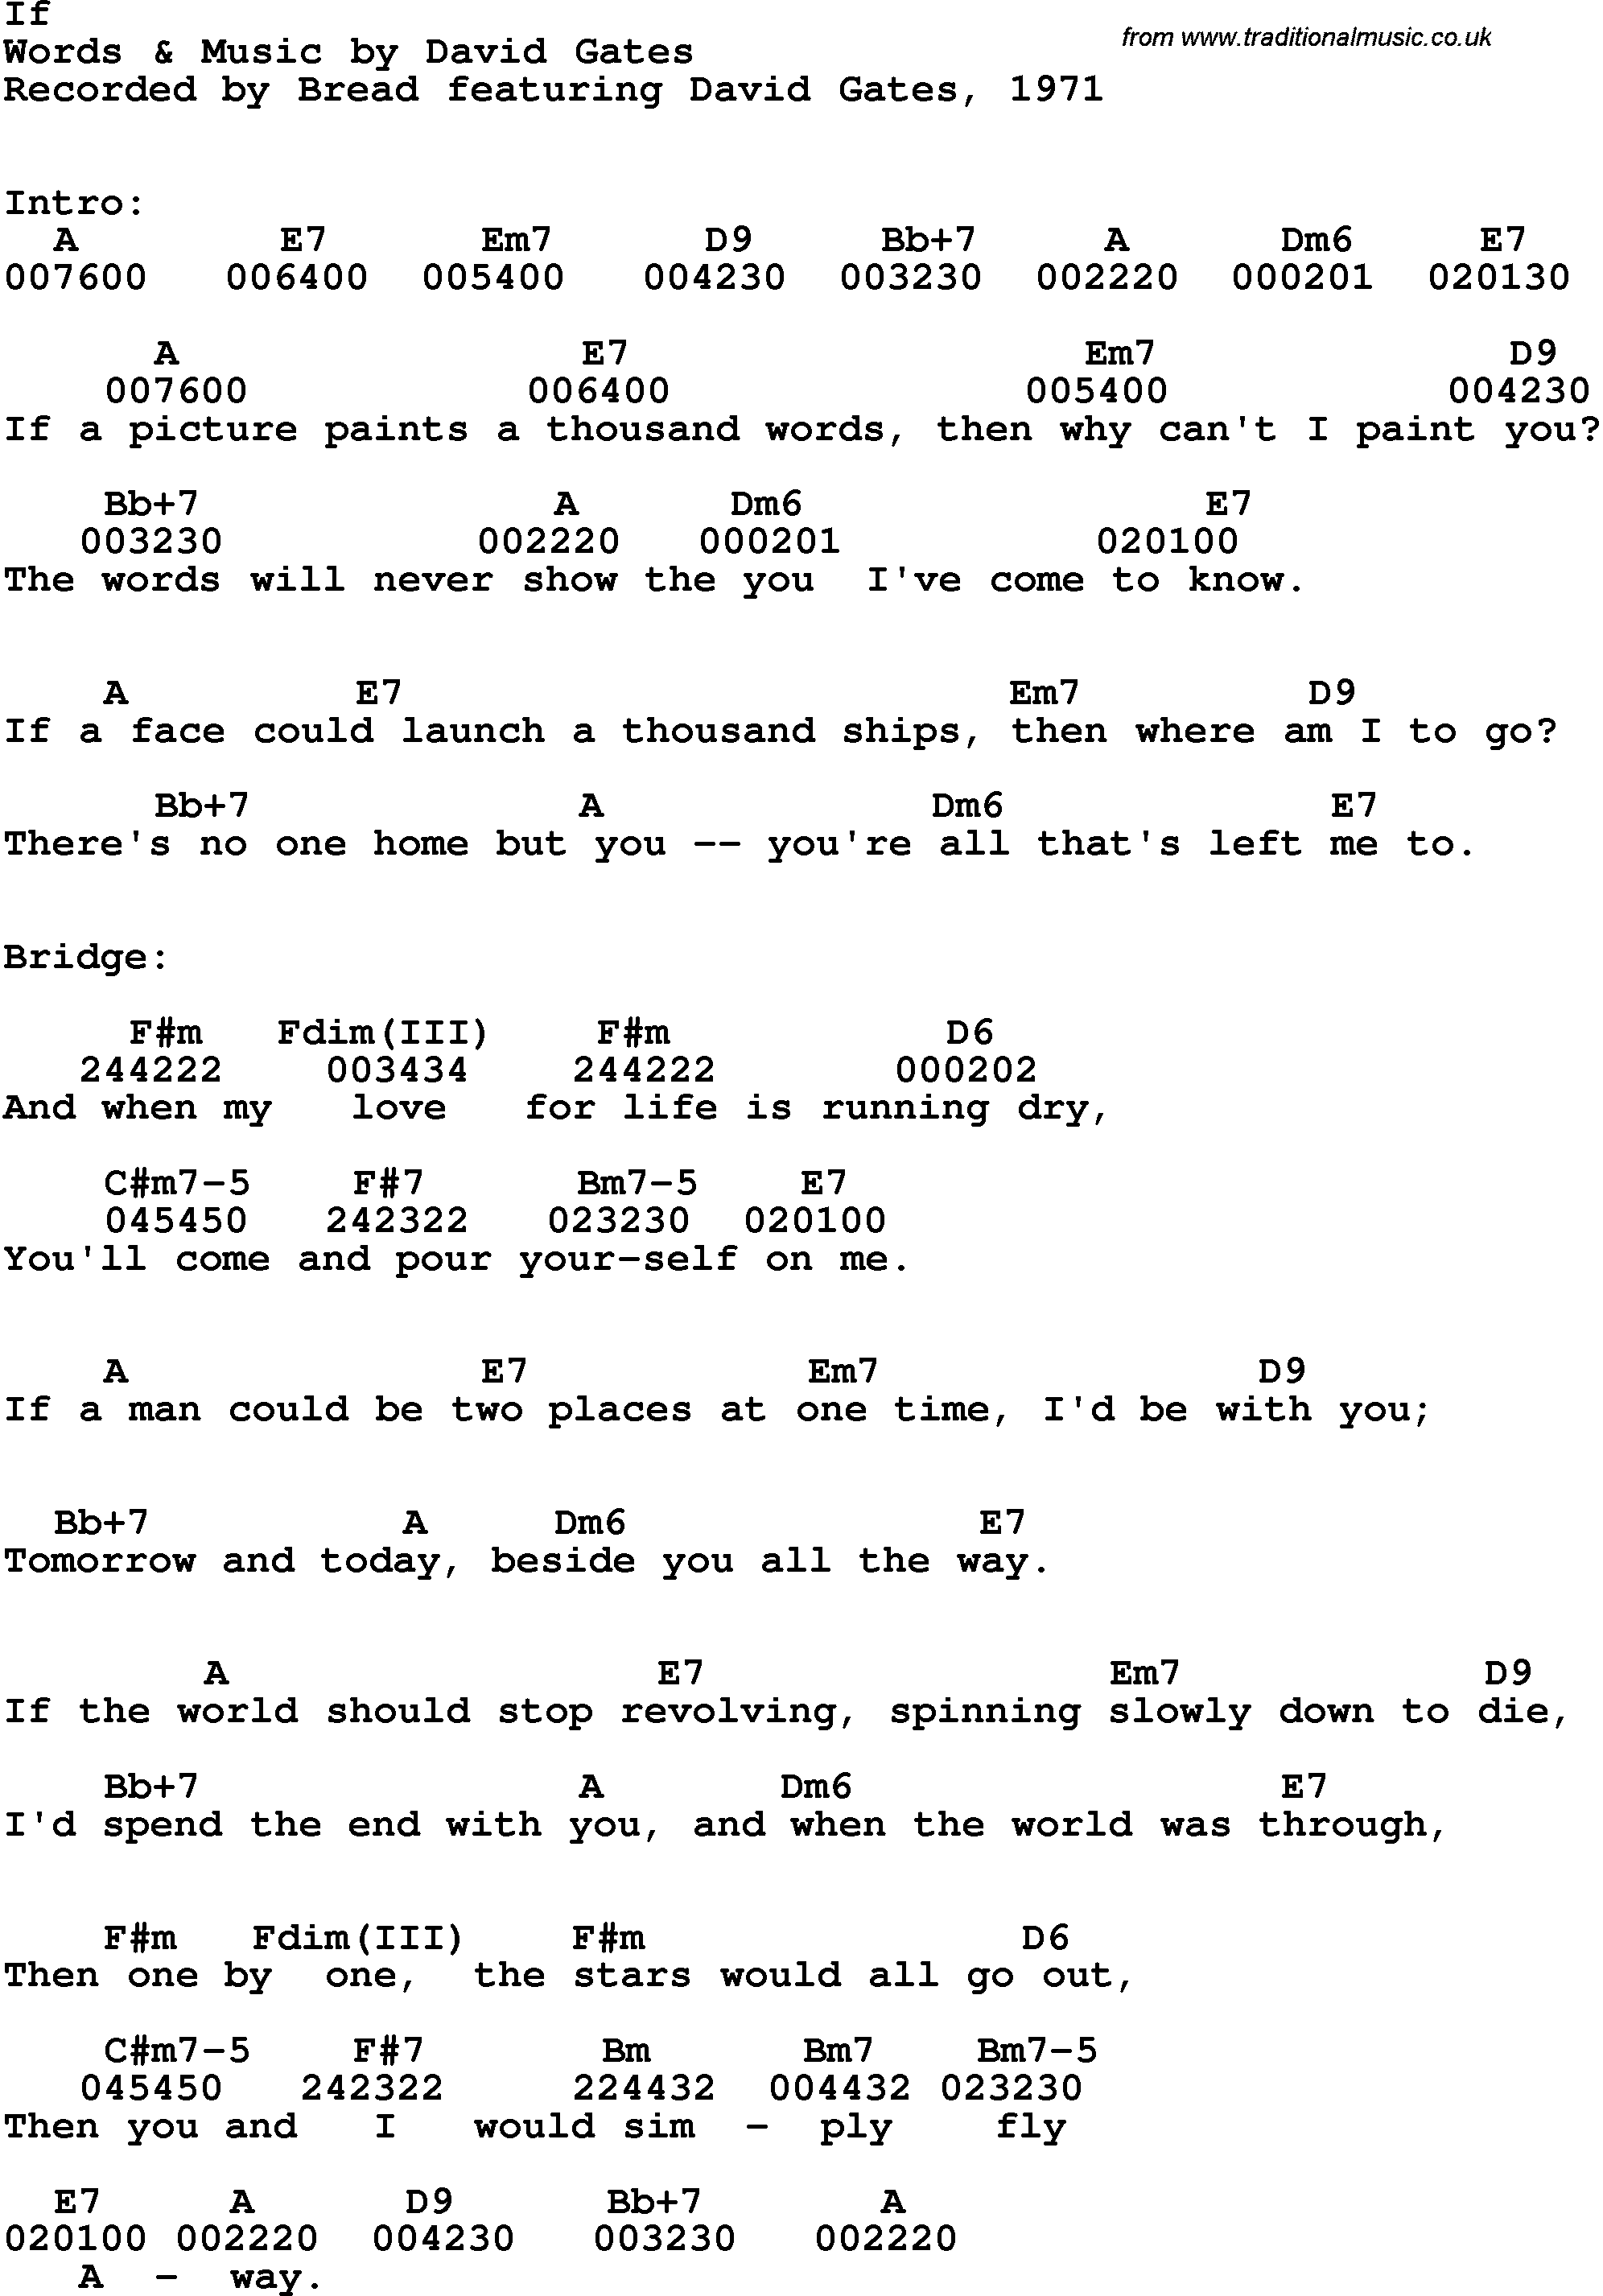 Song Lyrics with guitar chords for If - David Gates & Bread, 1971